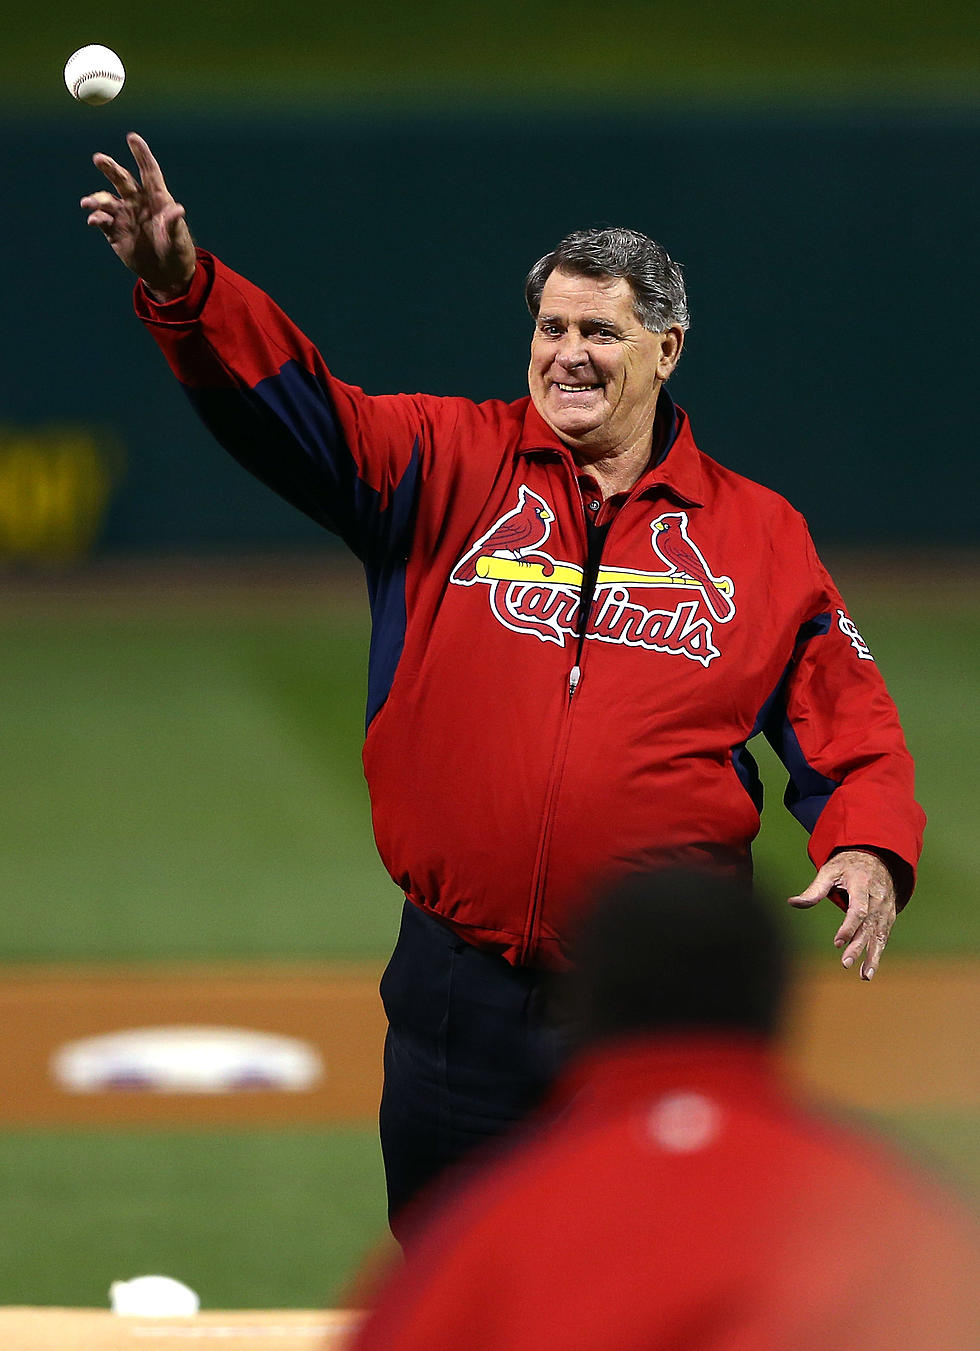 Cardinal Broadcaster Mike Shannon Undergoes Heart Surgery